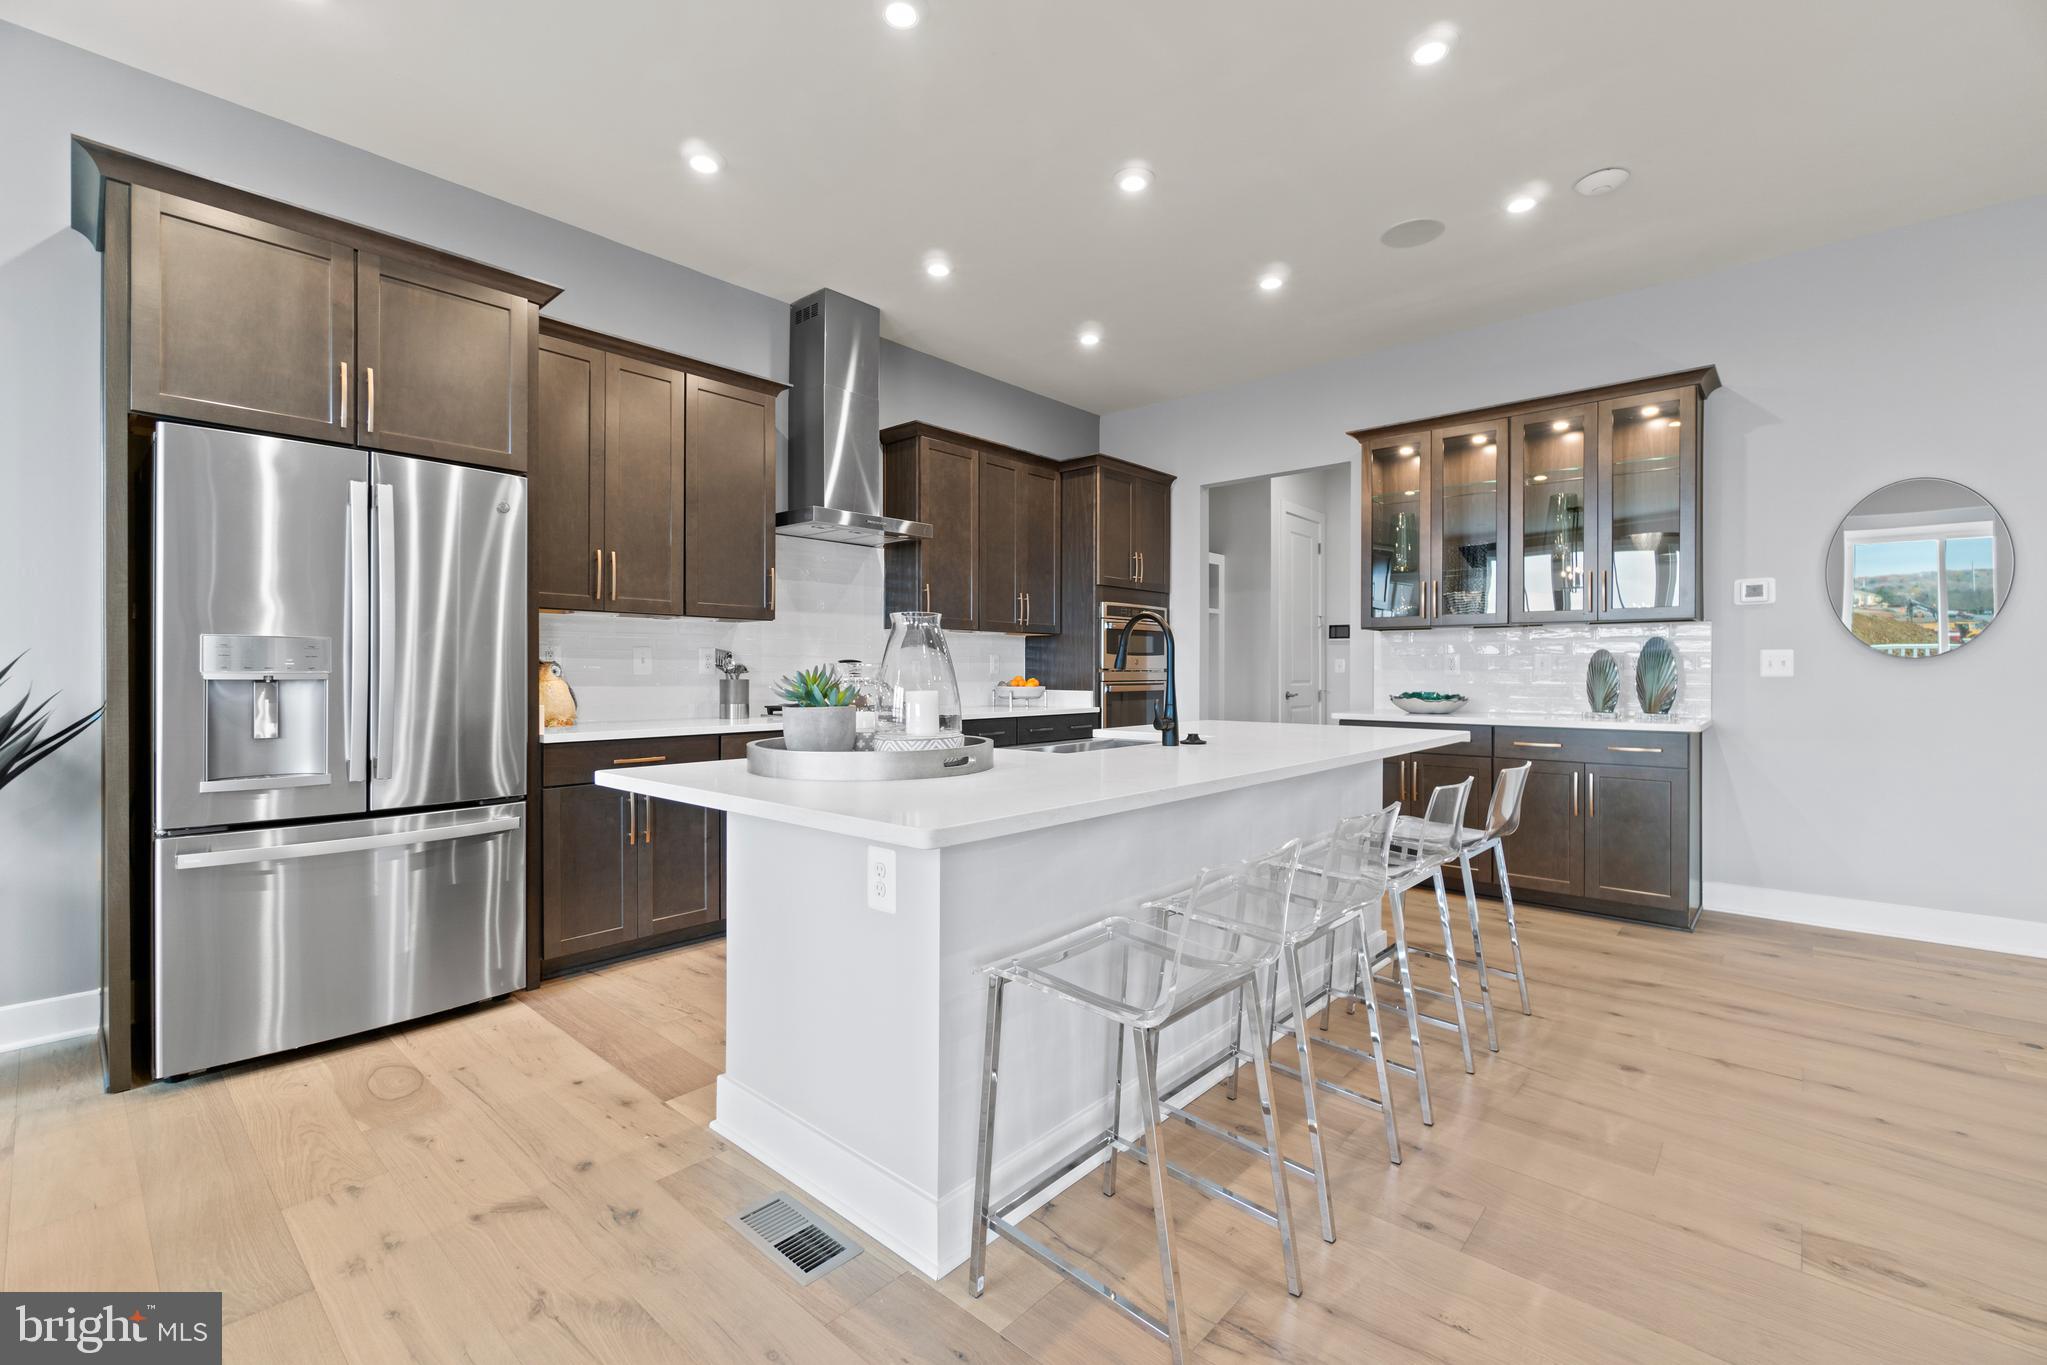 a kitchen with kitchen island a counter top space a sink stainless steel appliances and cabinets